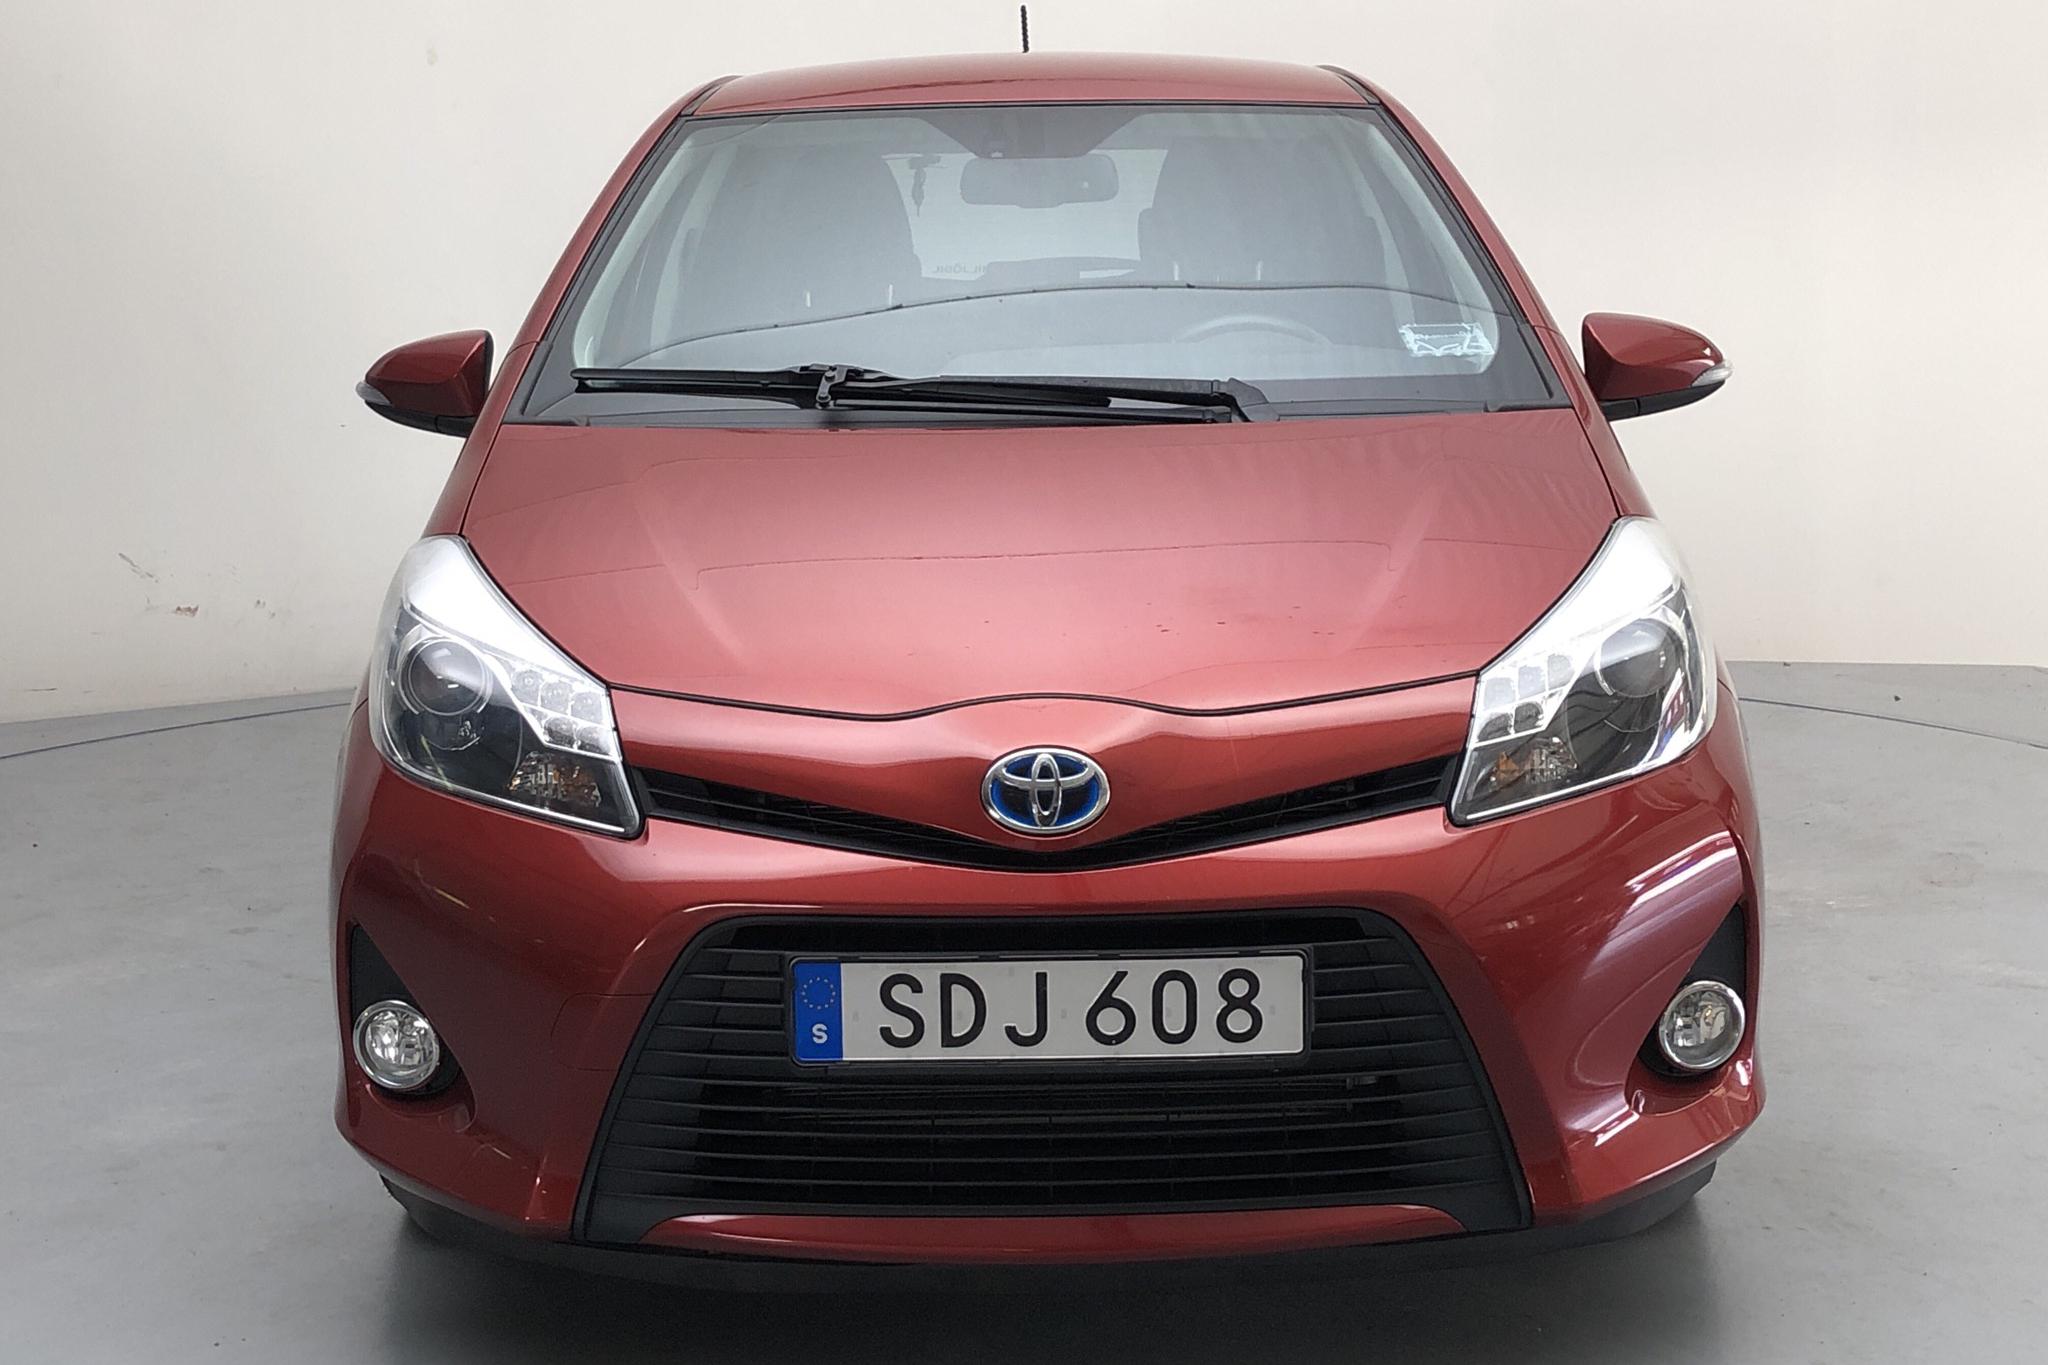 Toyota Yaris 1.5 HSD 5dr (75hk) - 91 070 km - Automatic - red - 2014